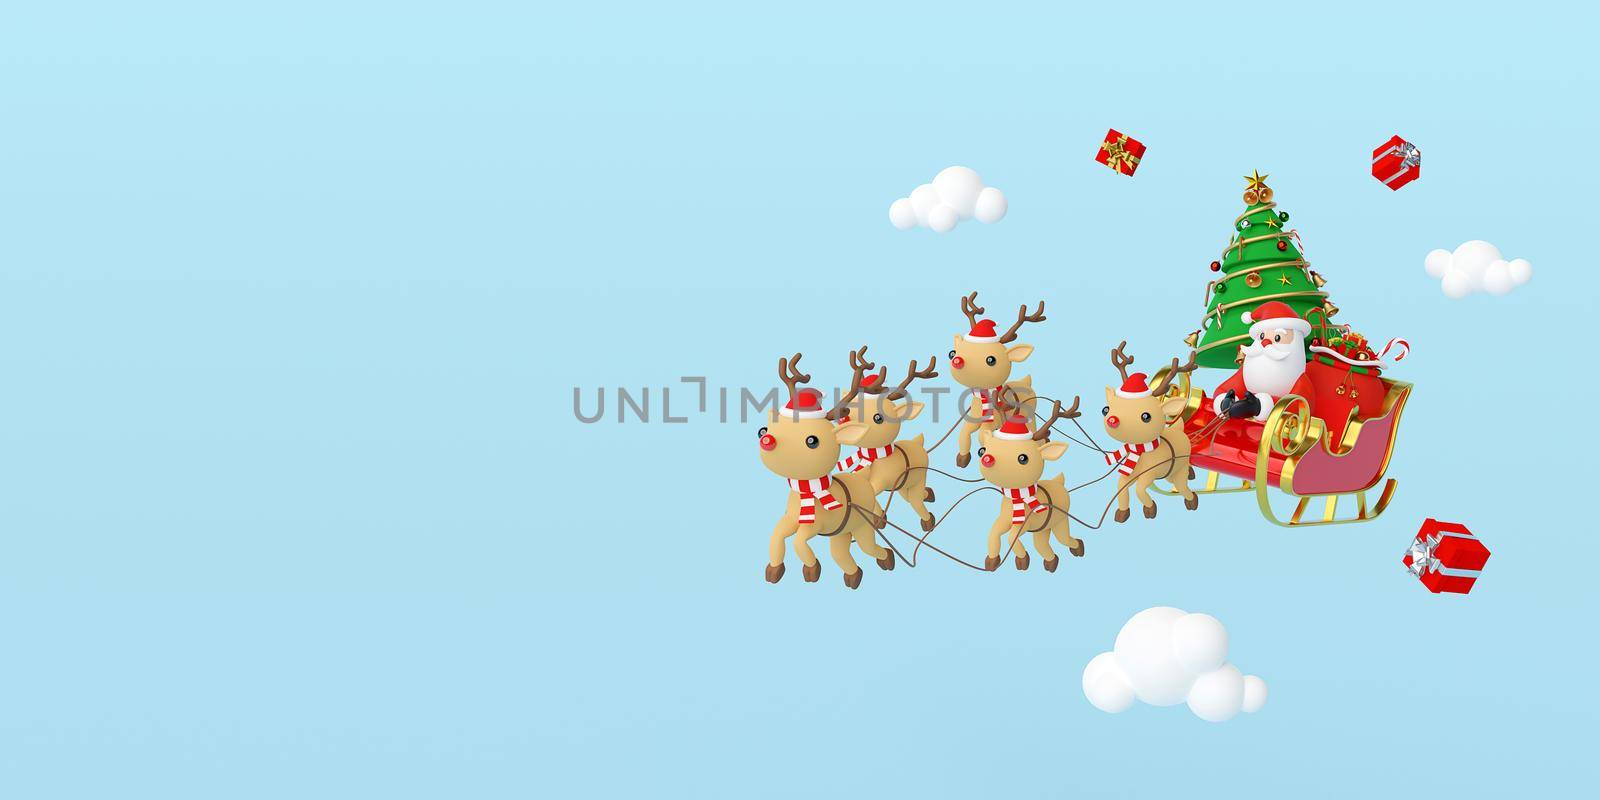 Scene of Santa Claus on a sleigh full of Christmas gifts and pulled by reindeer, 3d rendering